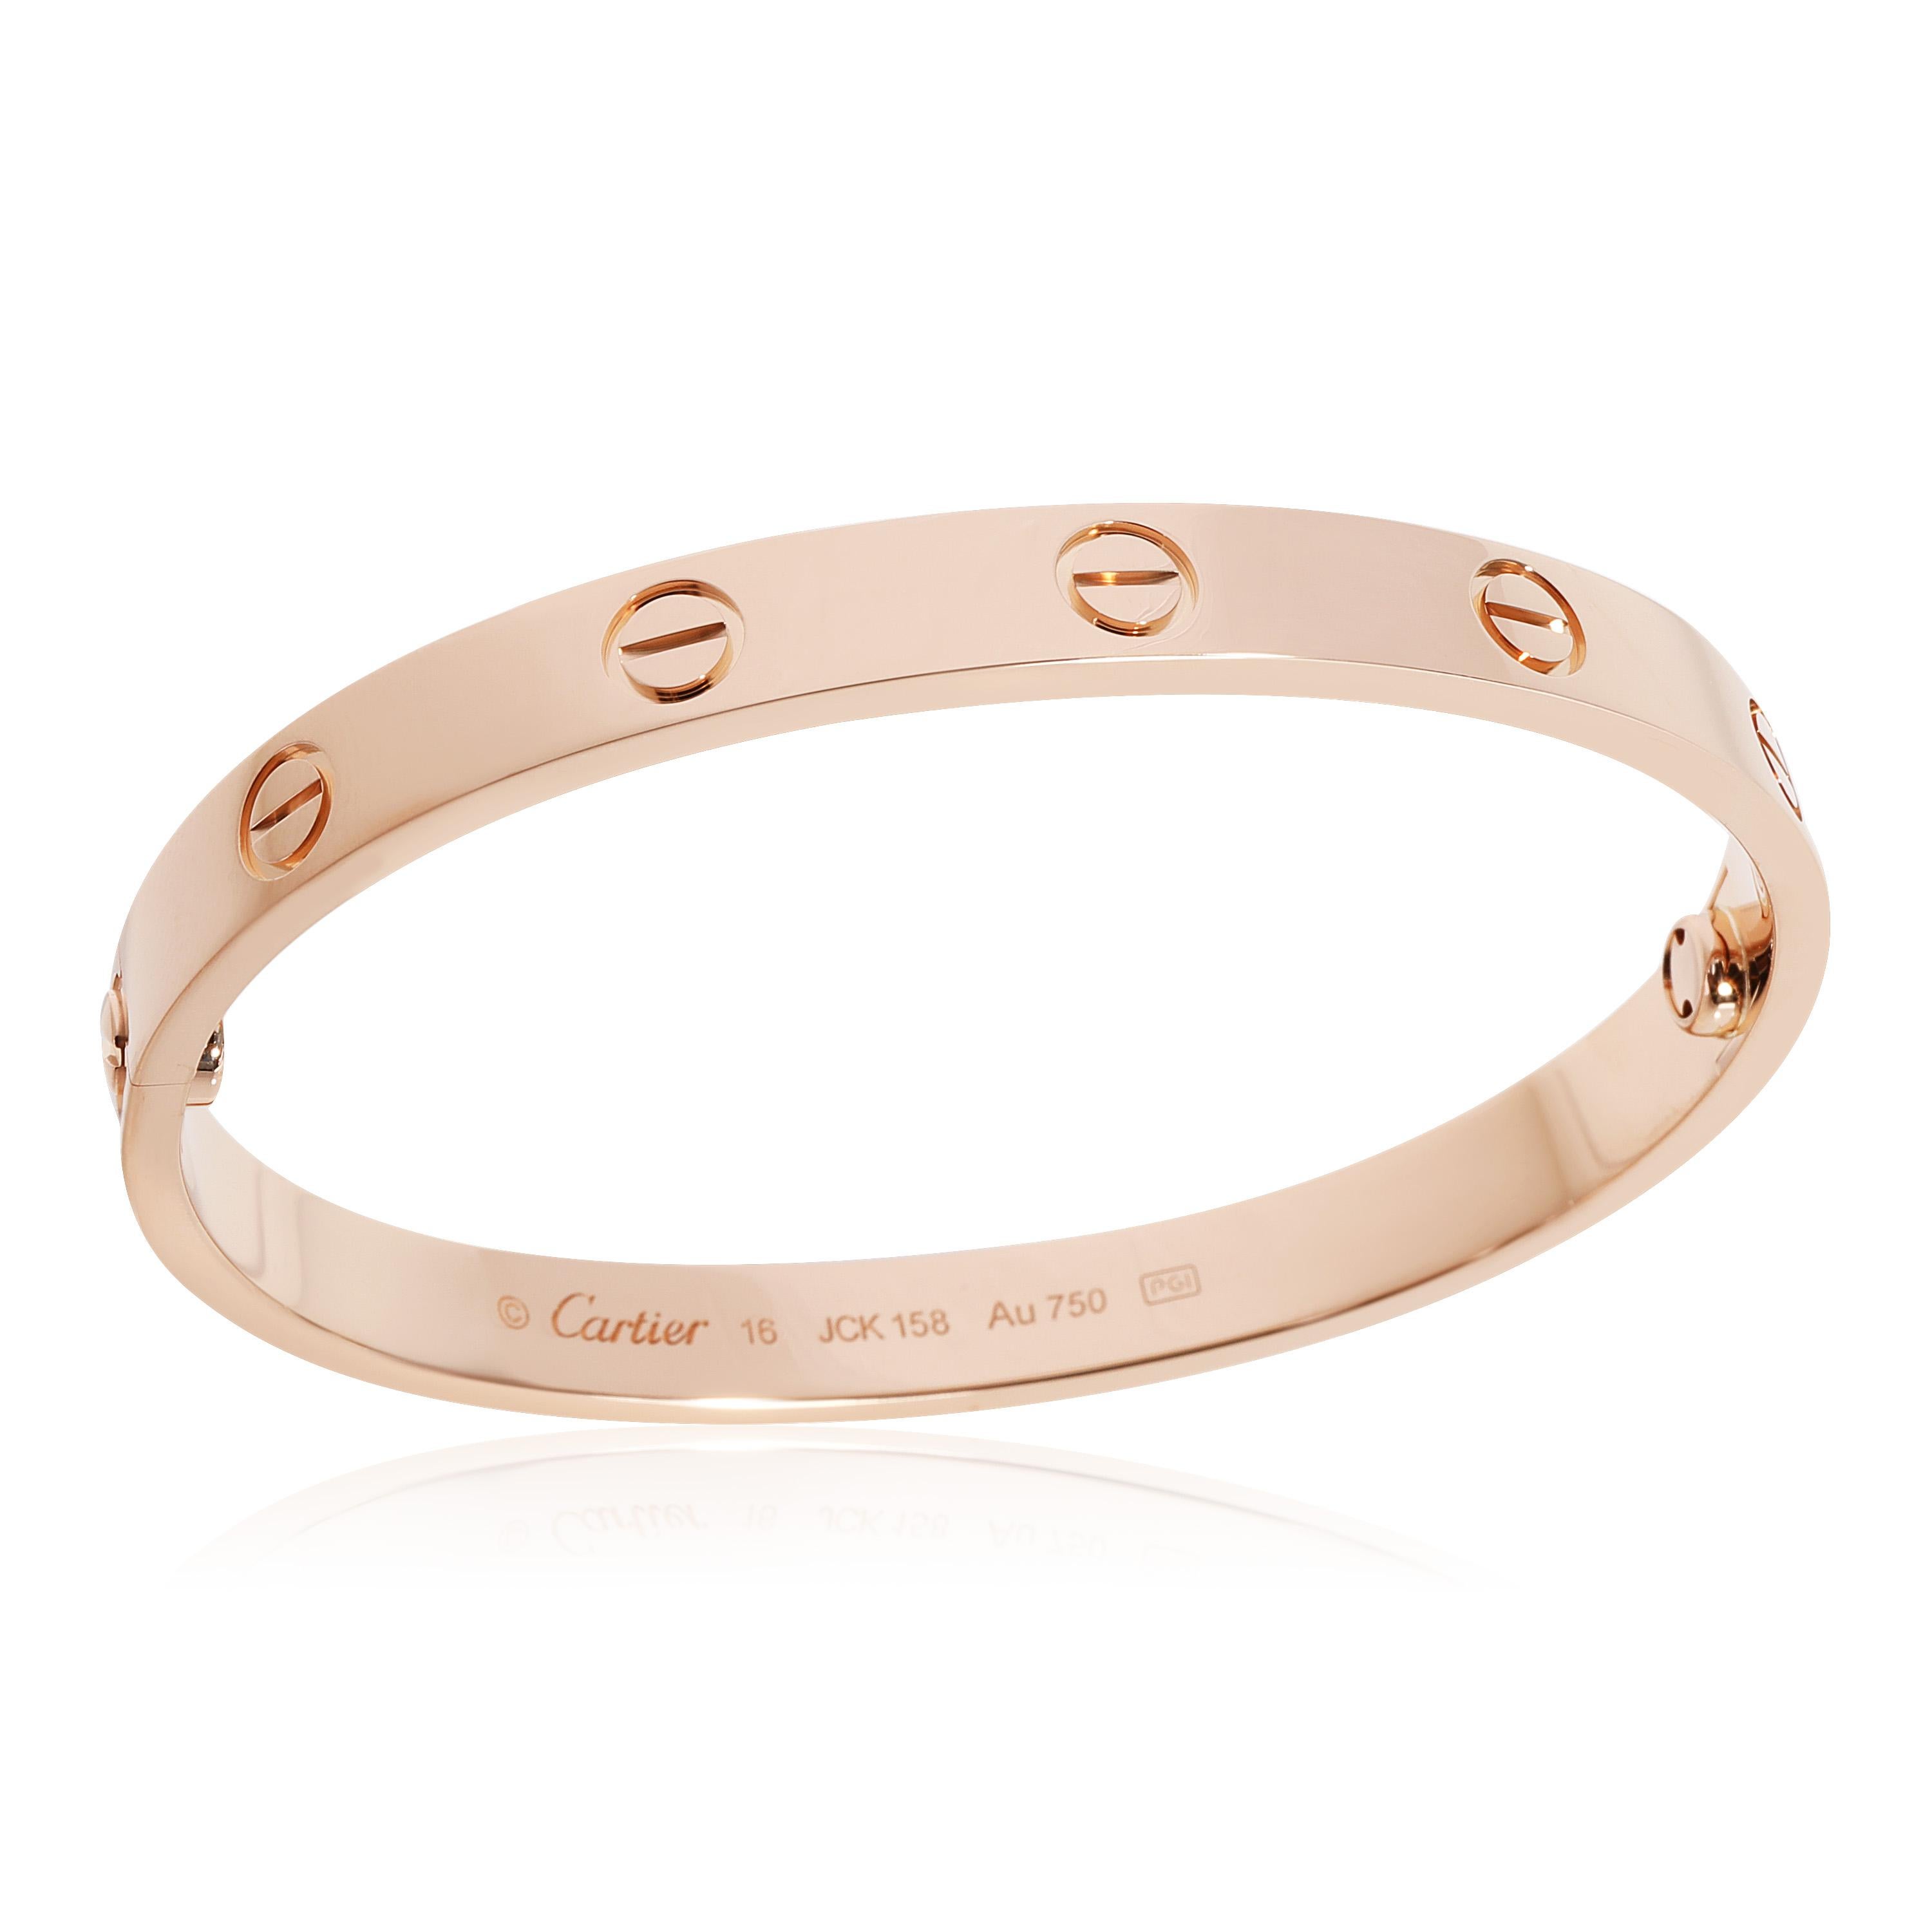 Cartier LOVE Bracelet in 18K Rose Gold

PRIMARY DETAILS
SKU: 117454
Listing Title: Cartier LOVE Bracelet in 18K Rose Gold
Condition Description: Retails for 6900 USD. In excellent condition and recently polished. Cartier size 16. Comes with Box,